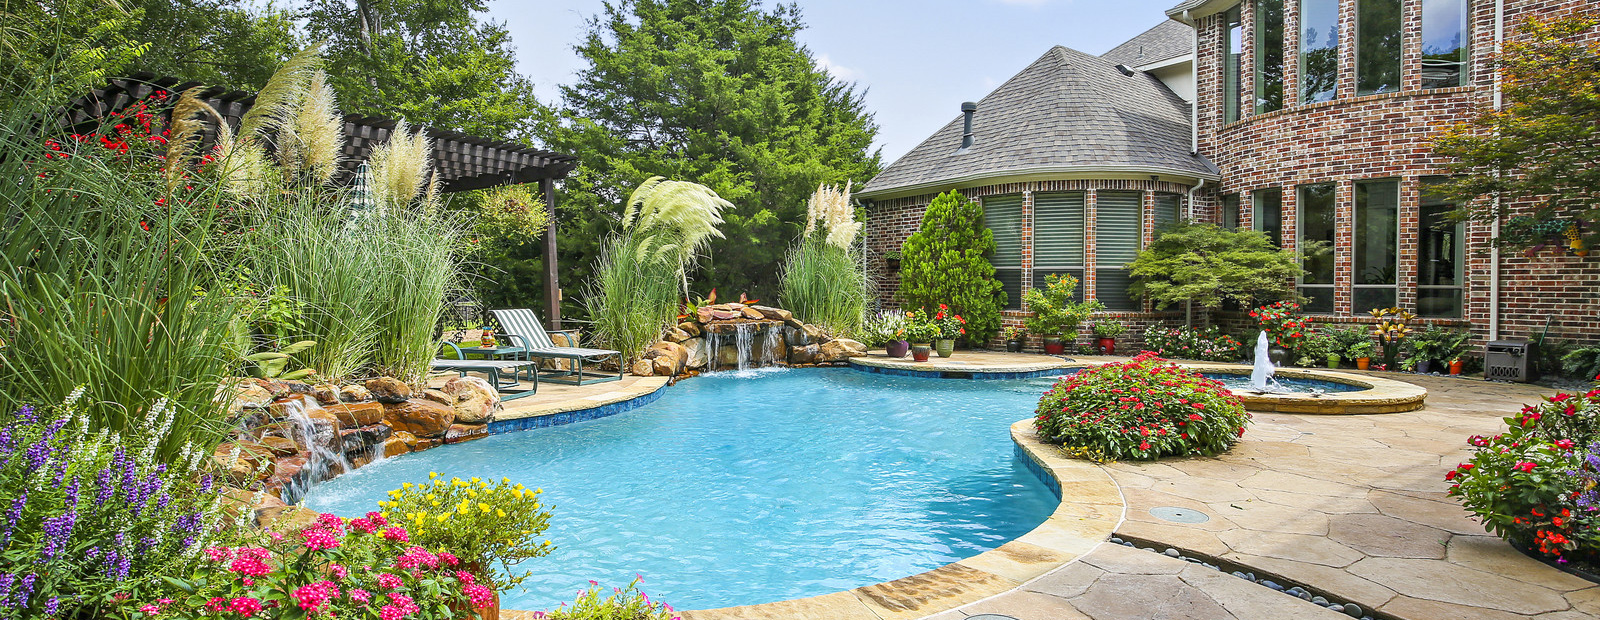 Dallas Home with Outdoor Pool